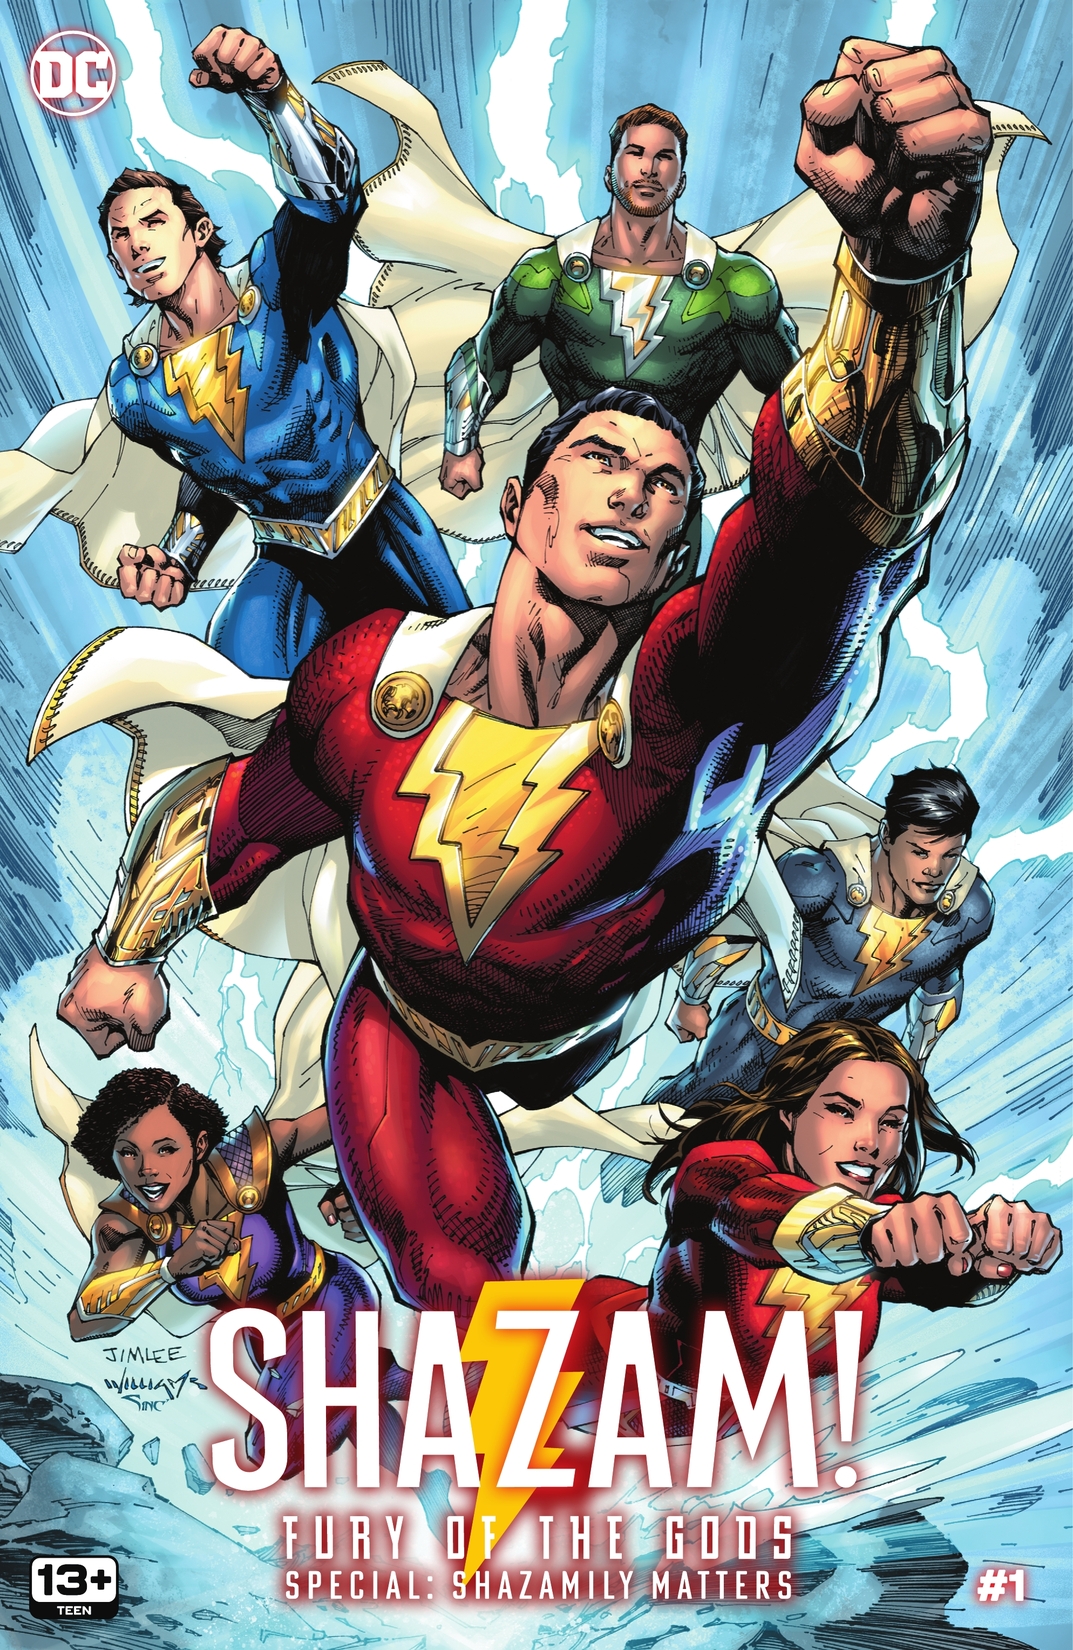 Shazam! Fury of the Gods Special: Shazamily Matters #1 preview images